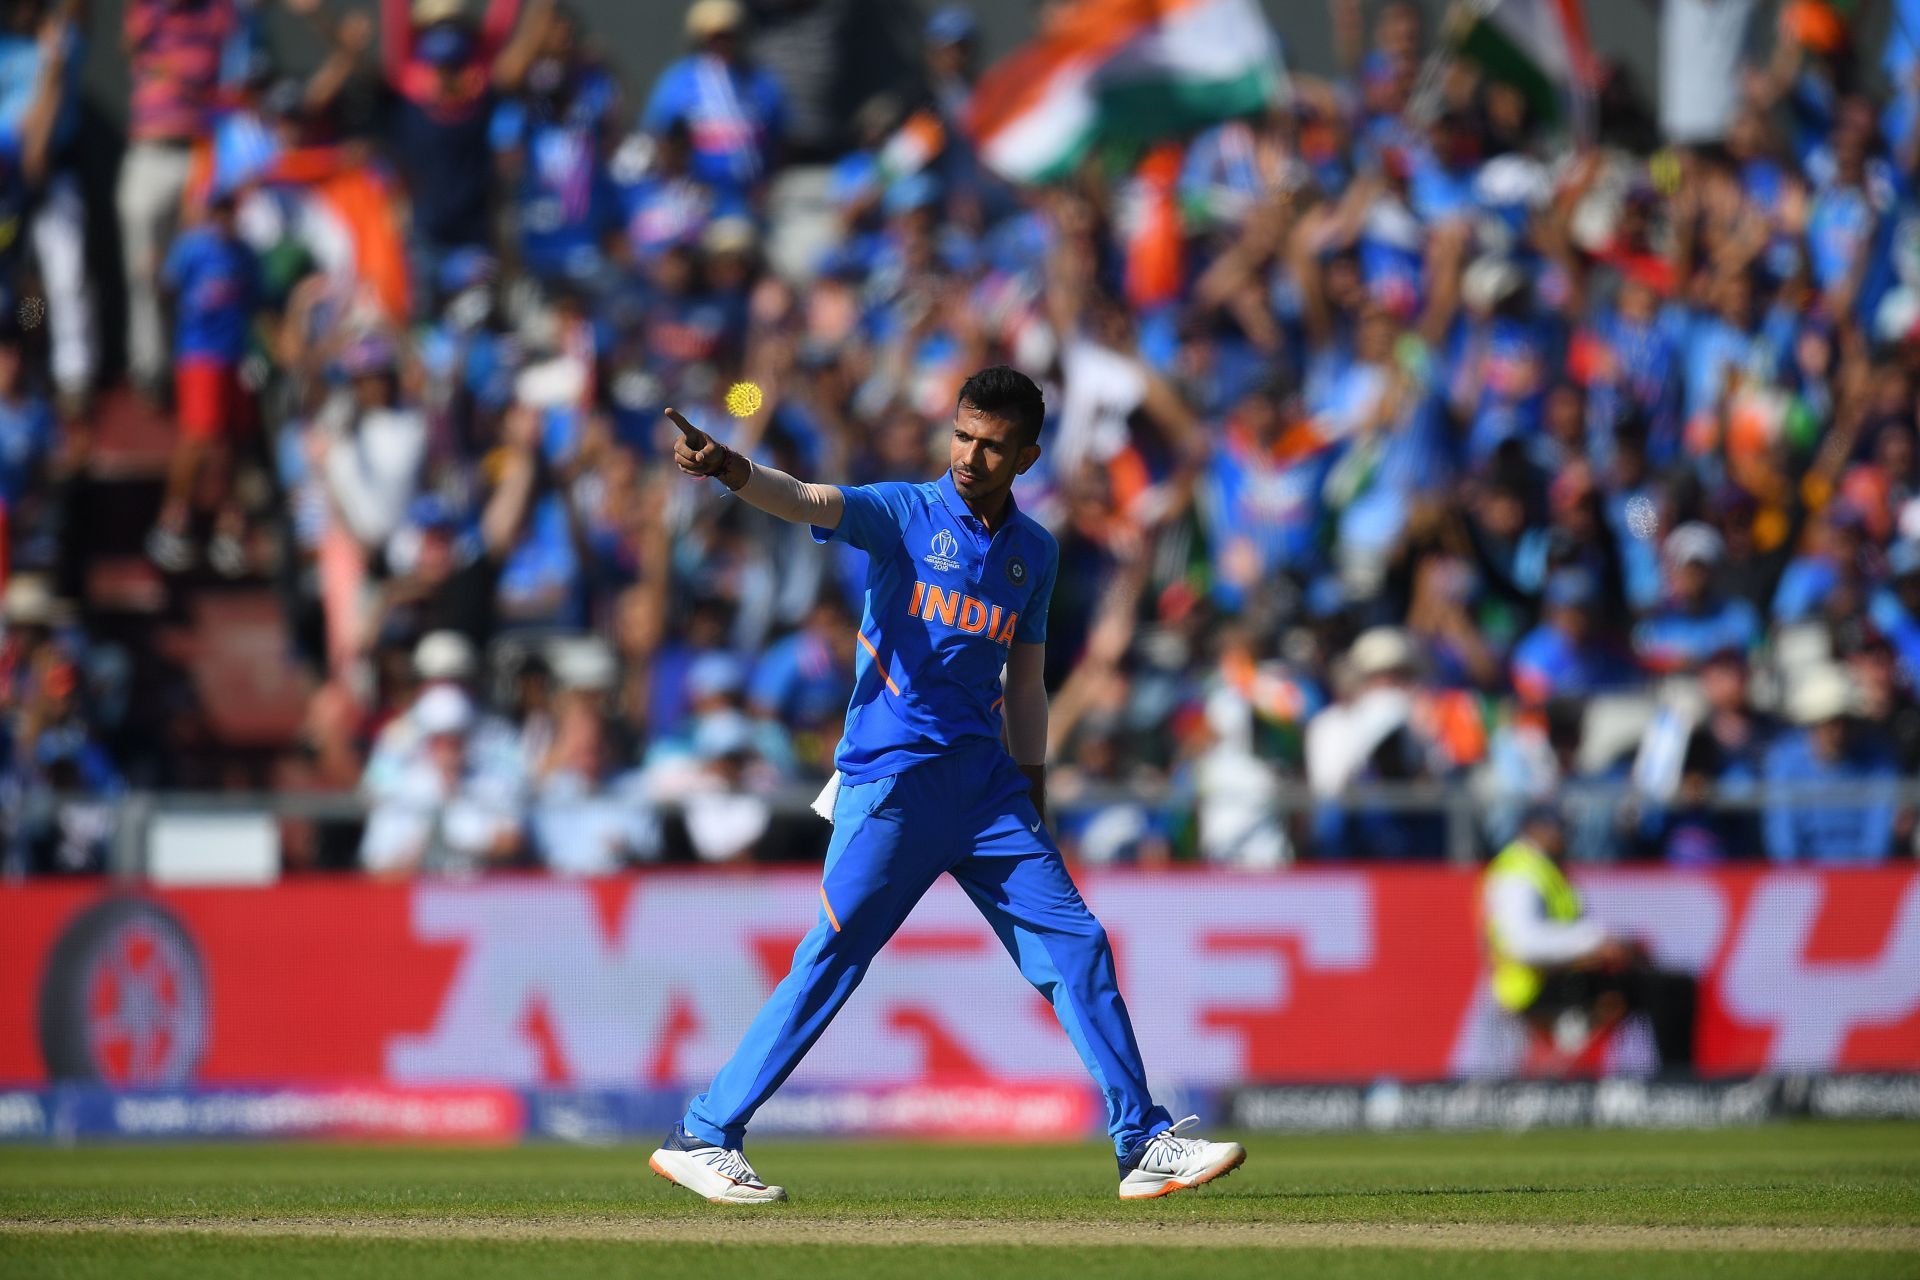 Yuzvendra Chahal picked up 12 wickets in the 2019 World Cup.